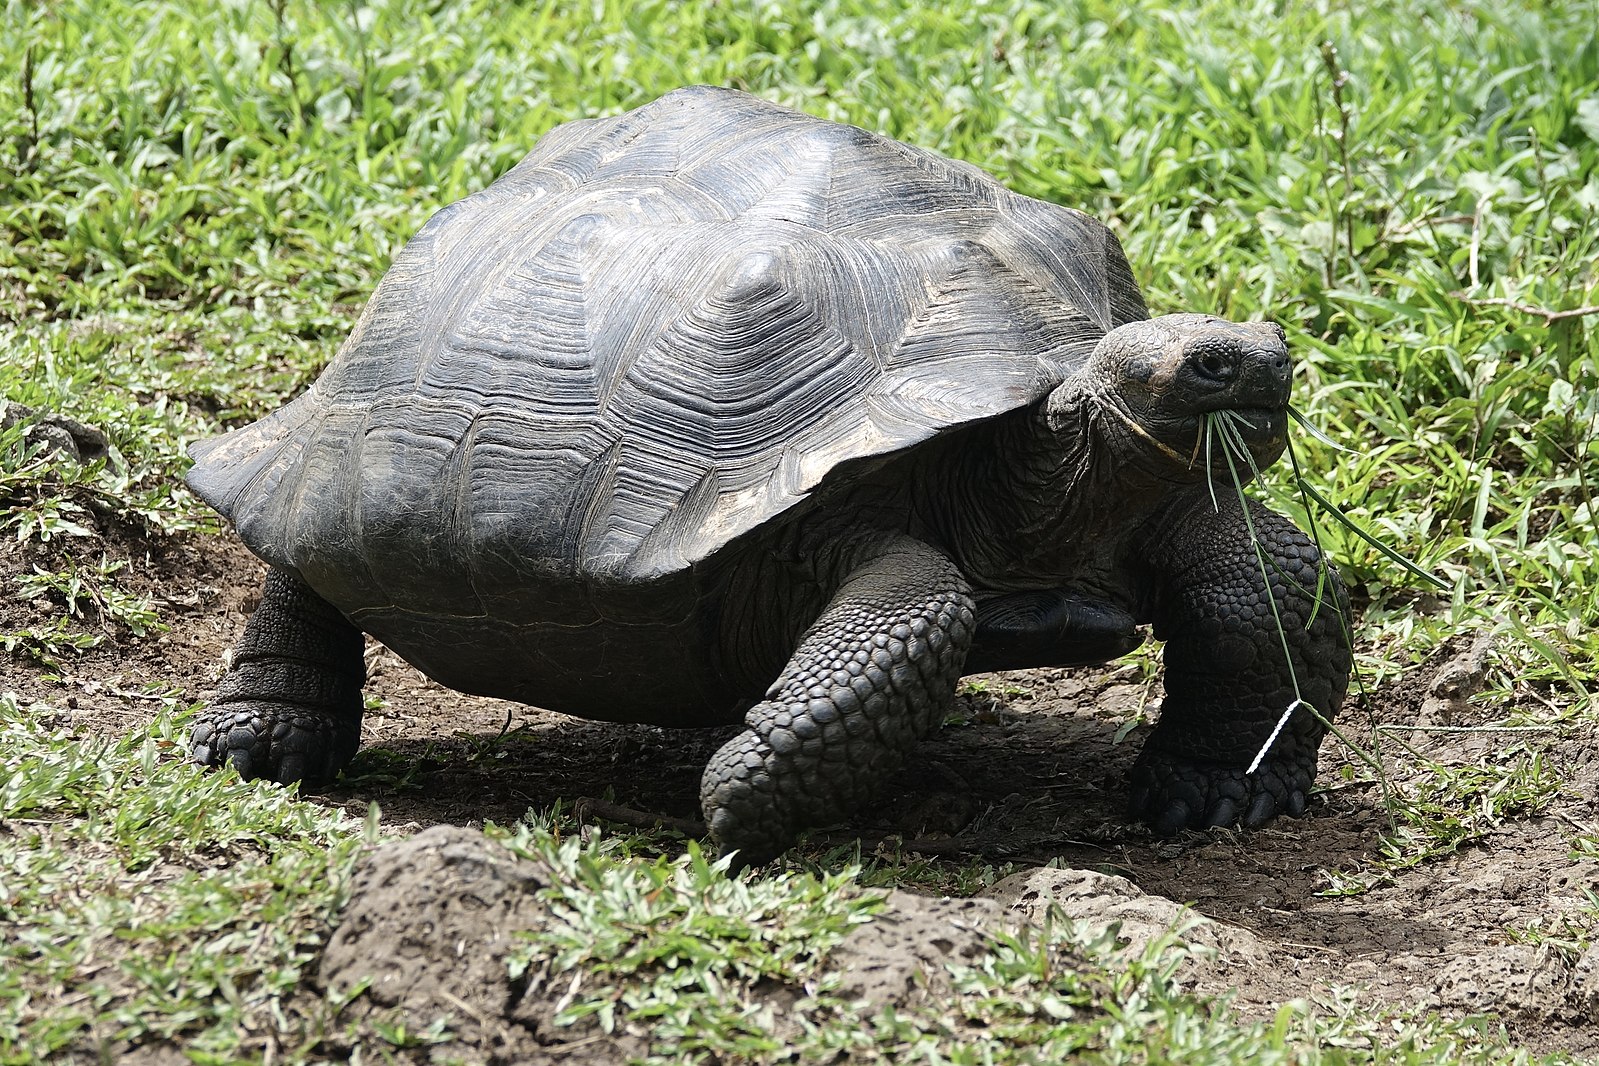 Can Tortoises Eat Plums